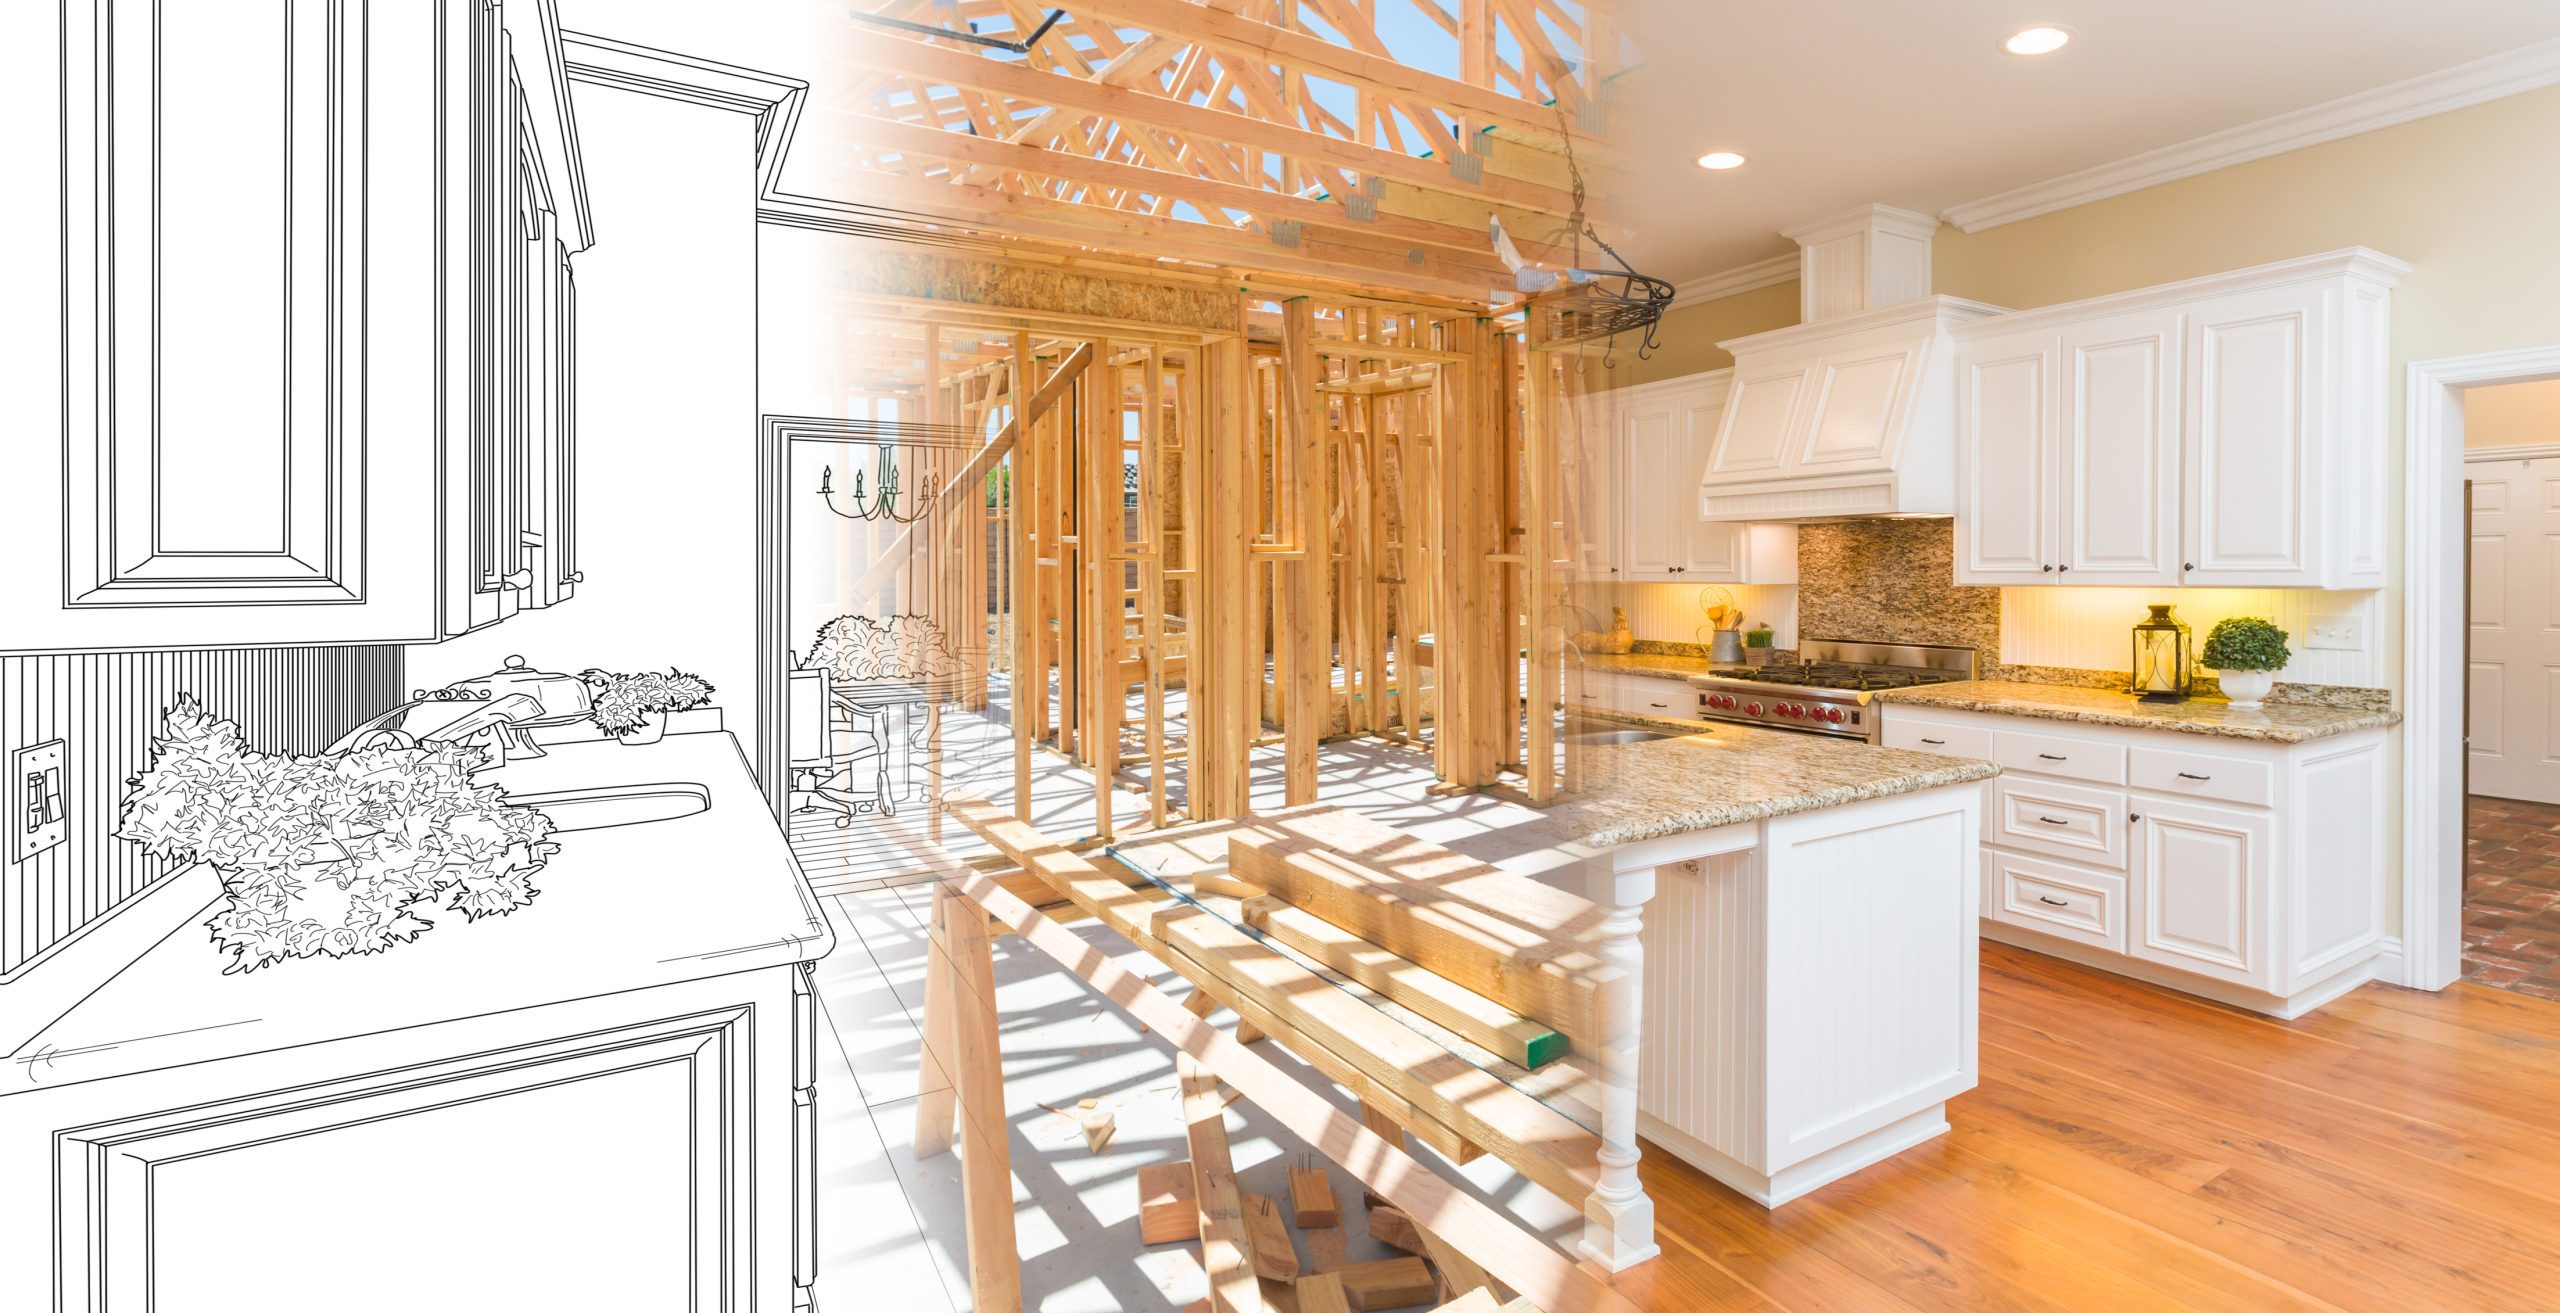 Kitchen Blueprint Drawing Gradating Into House Construction Framing Then Into Finished Build.